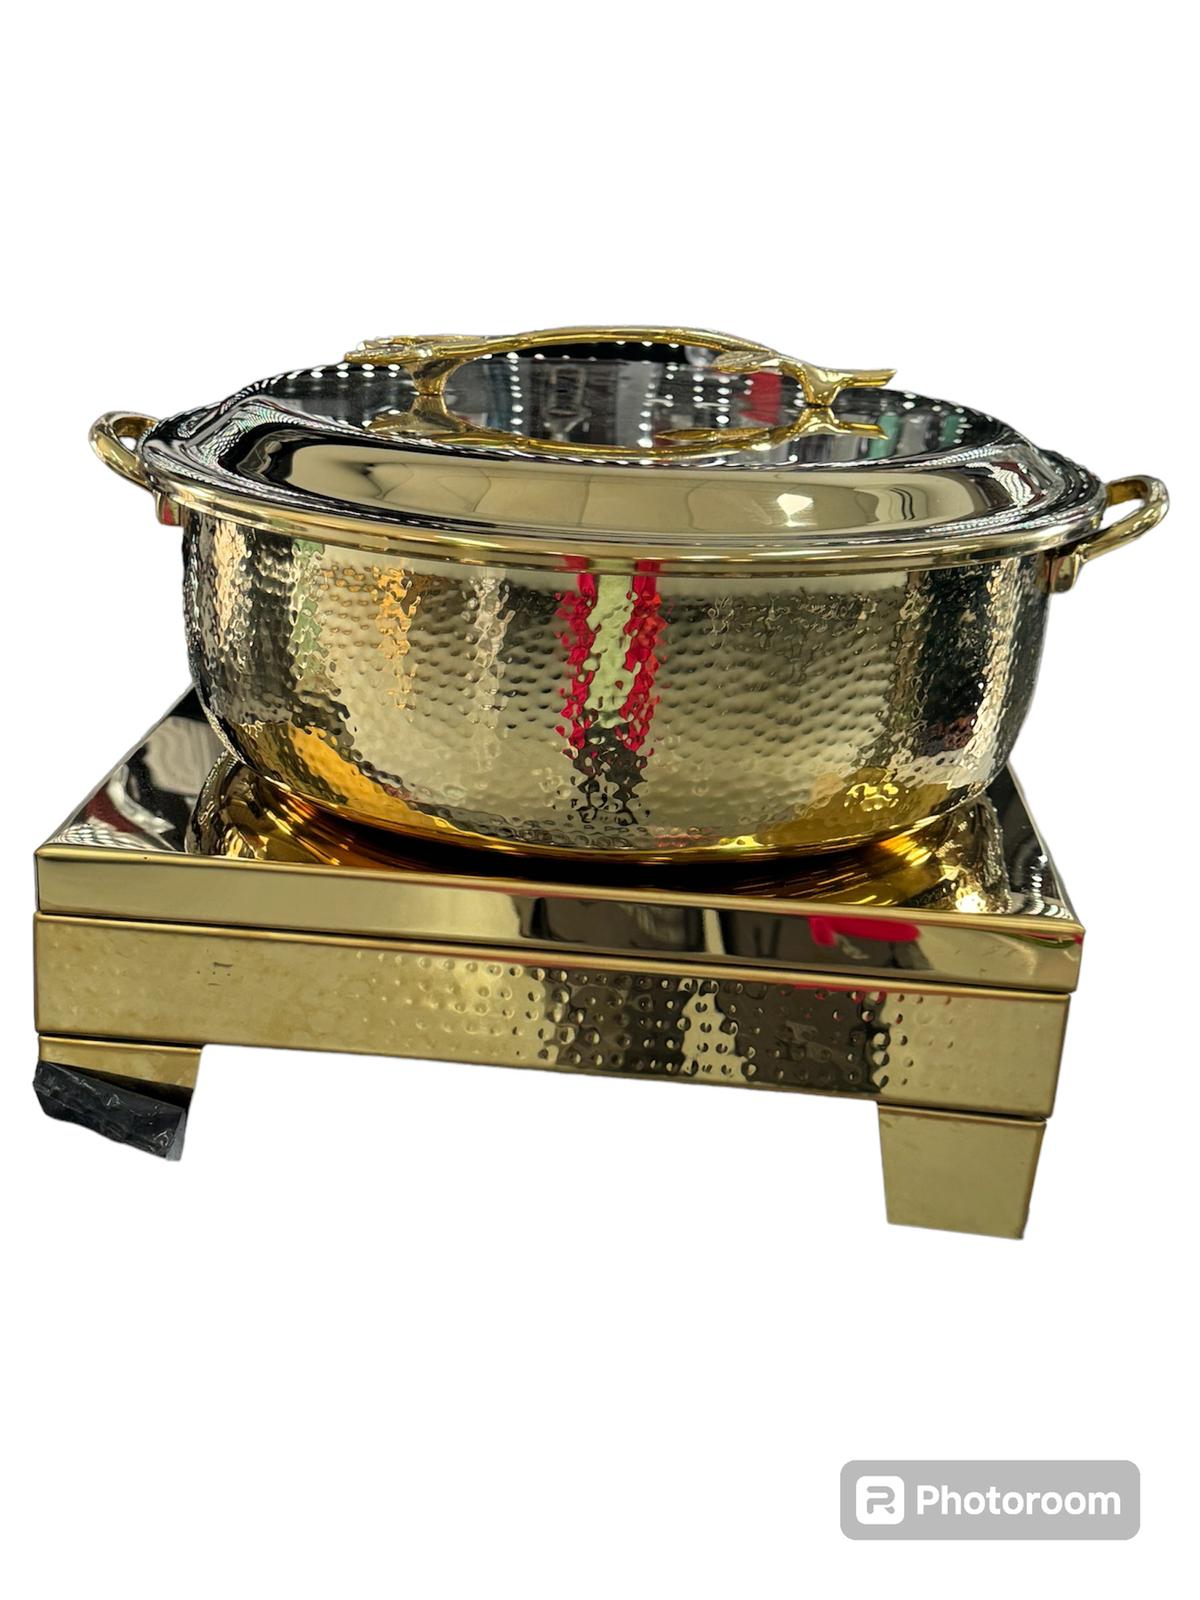 Colored/Deluxe Chafing Dish